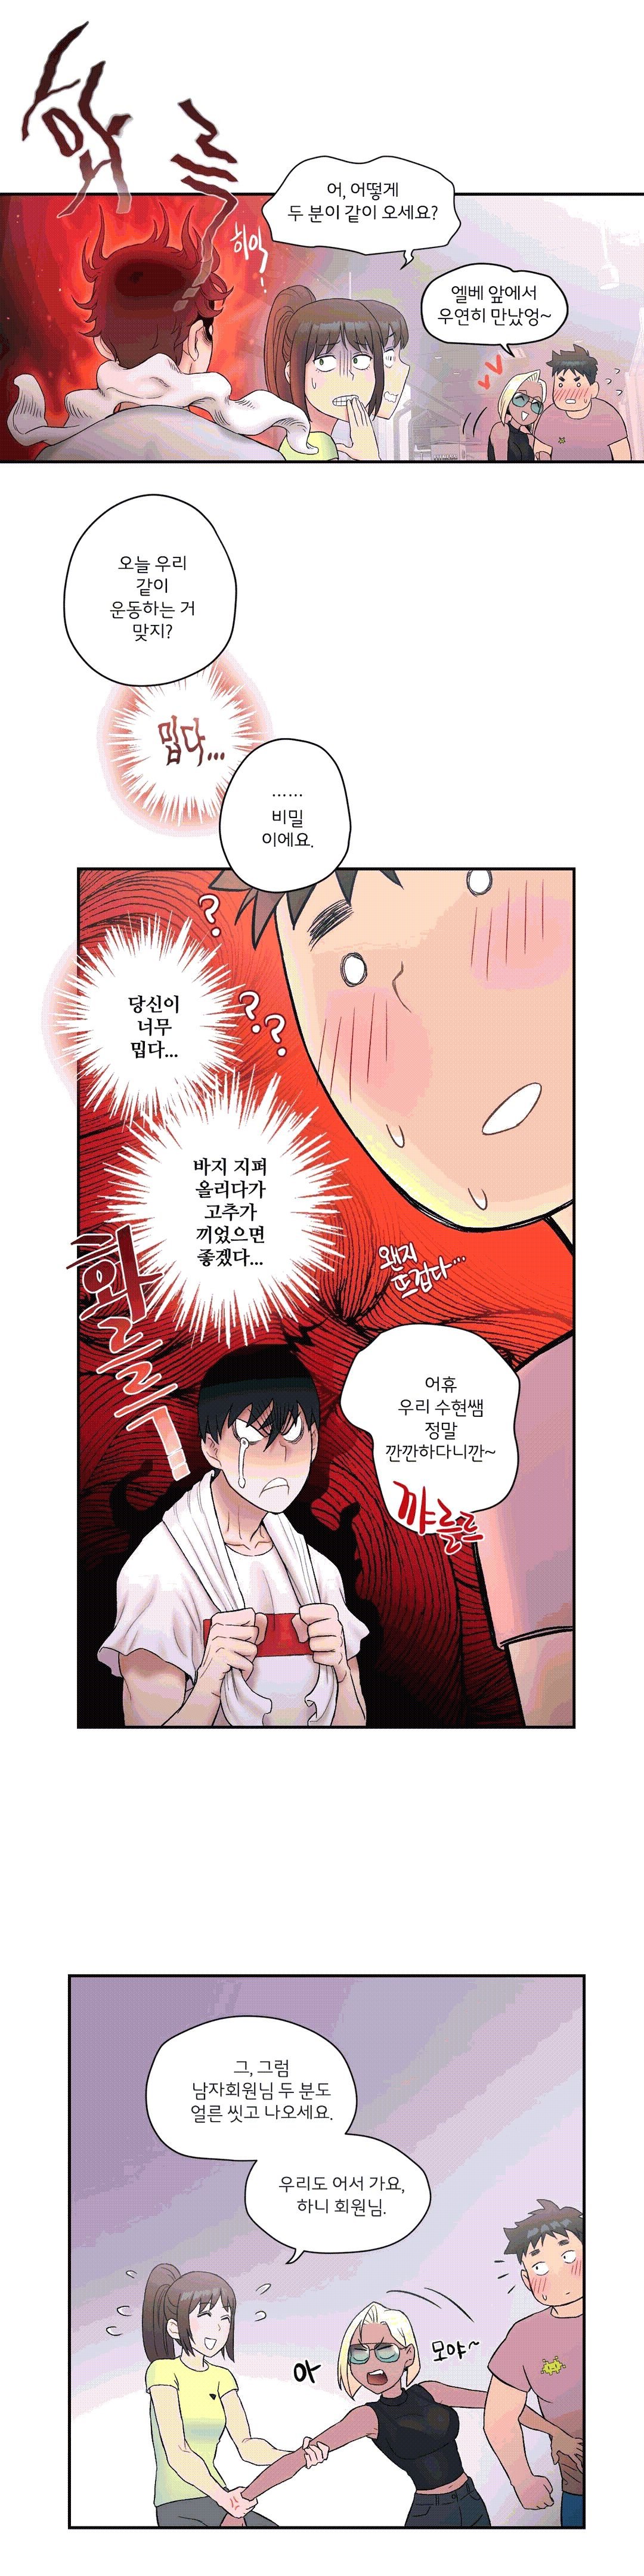 Sexercise Raw - Chapter 9 Page 17